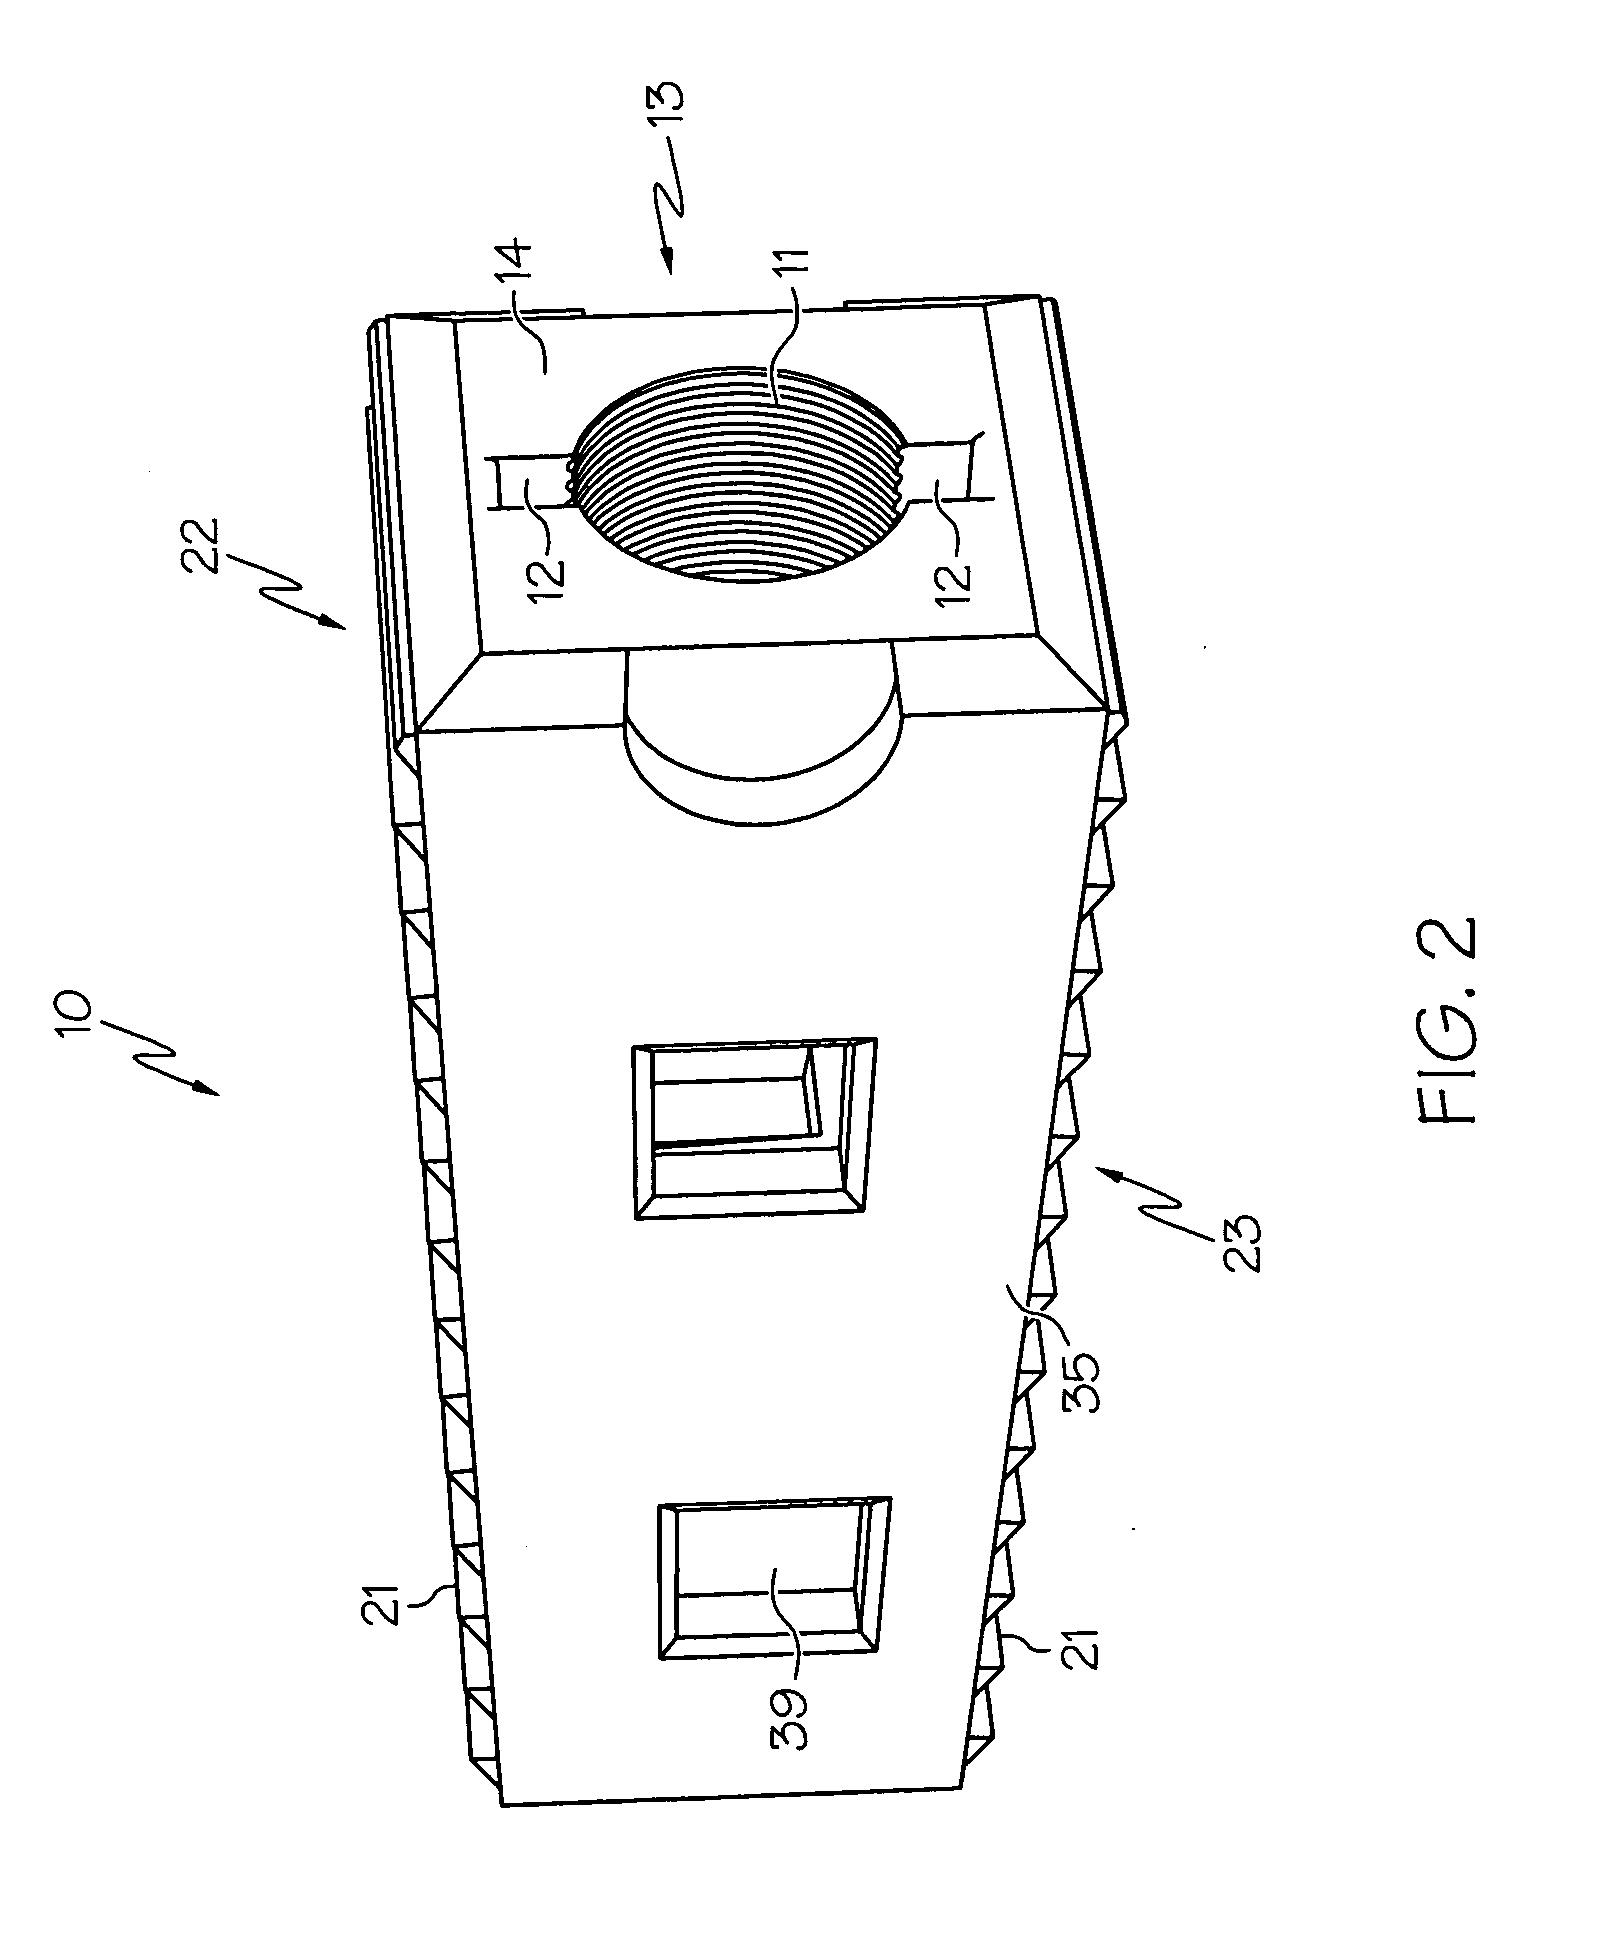 Spinal interbody spacer device